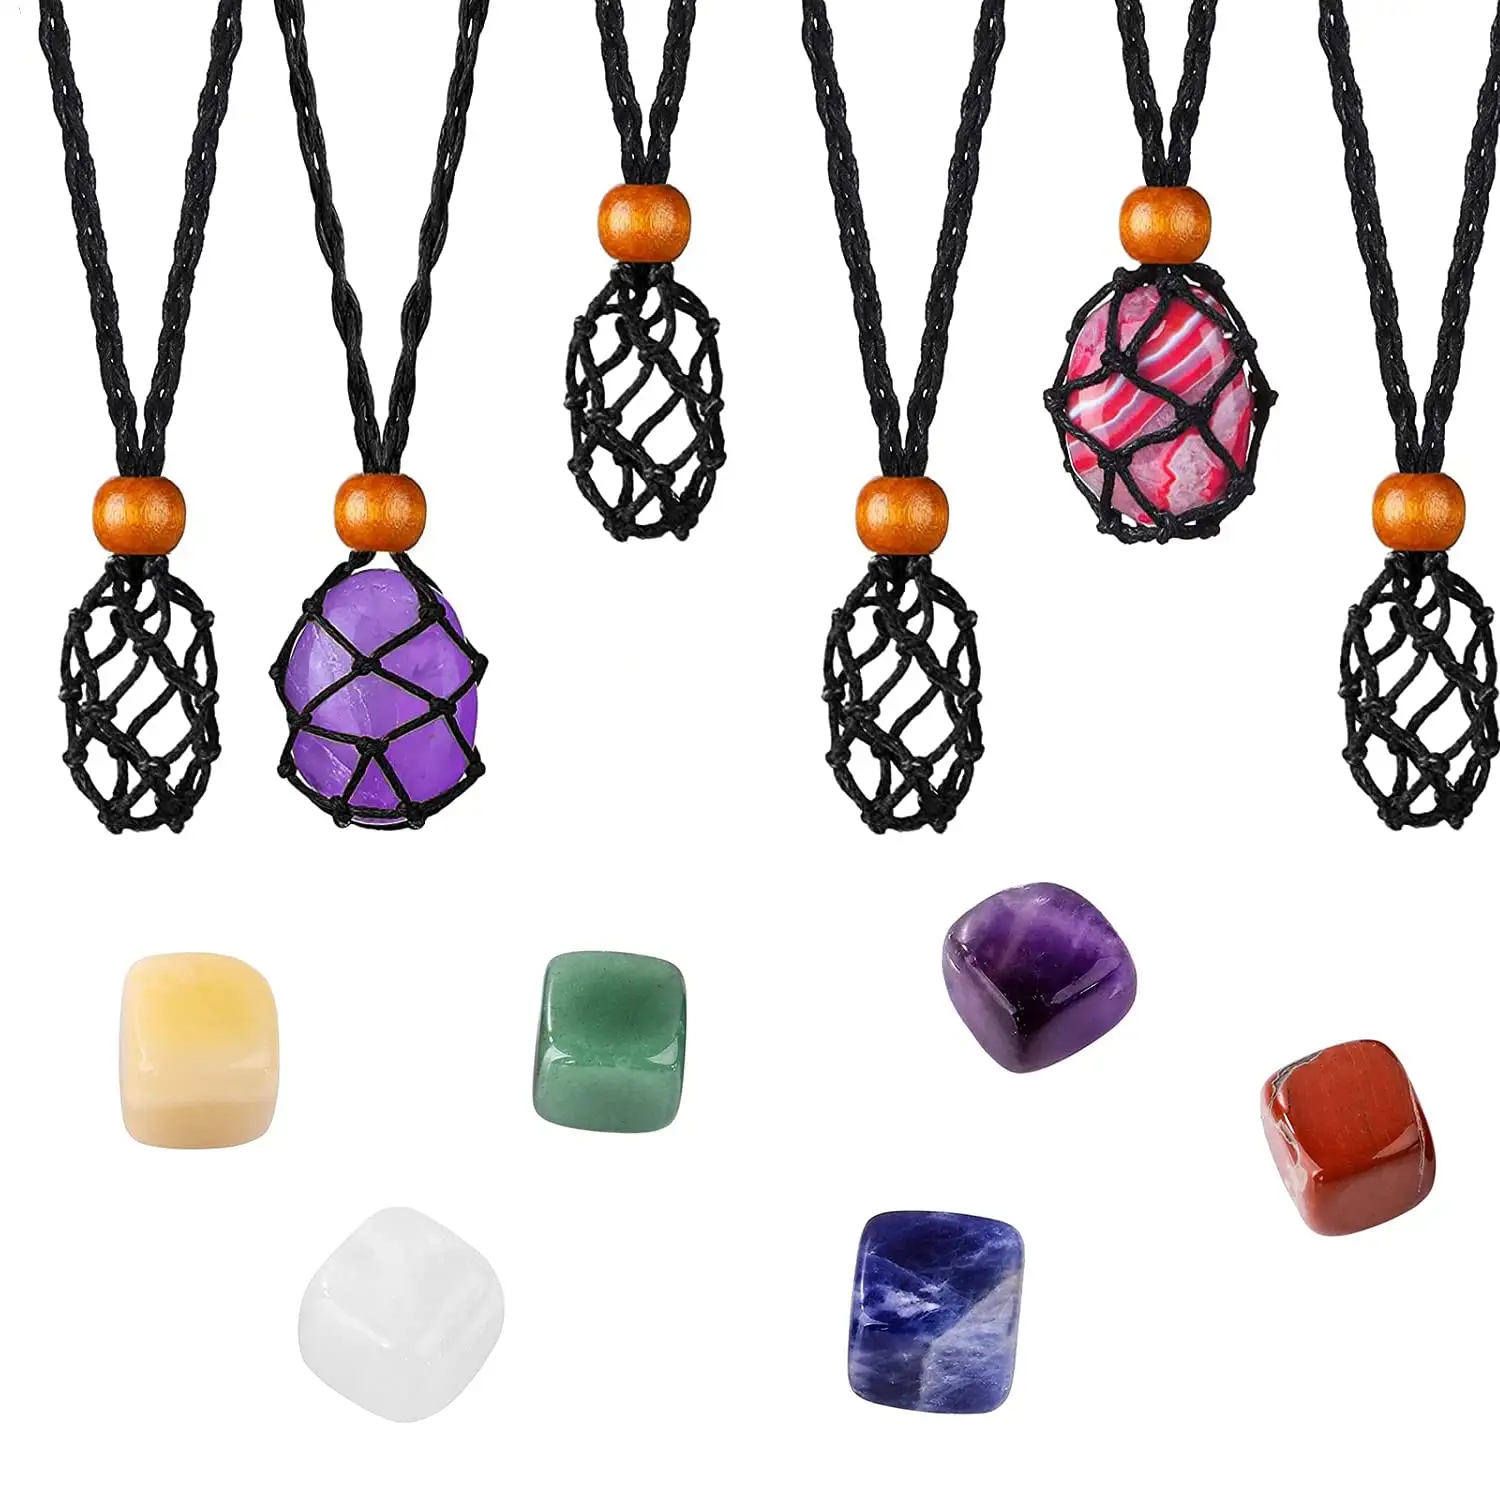 Hot Sale Woven Mesh Pendant Natural Crystal Empty Stone Holder Necklace Cord